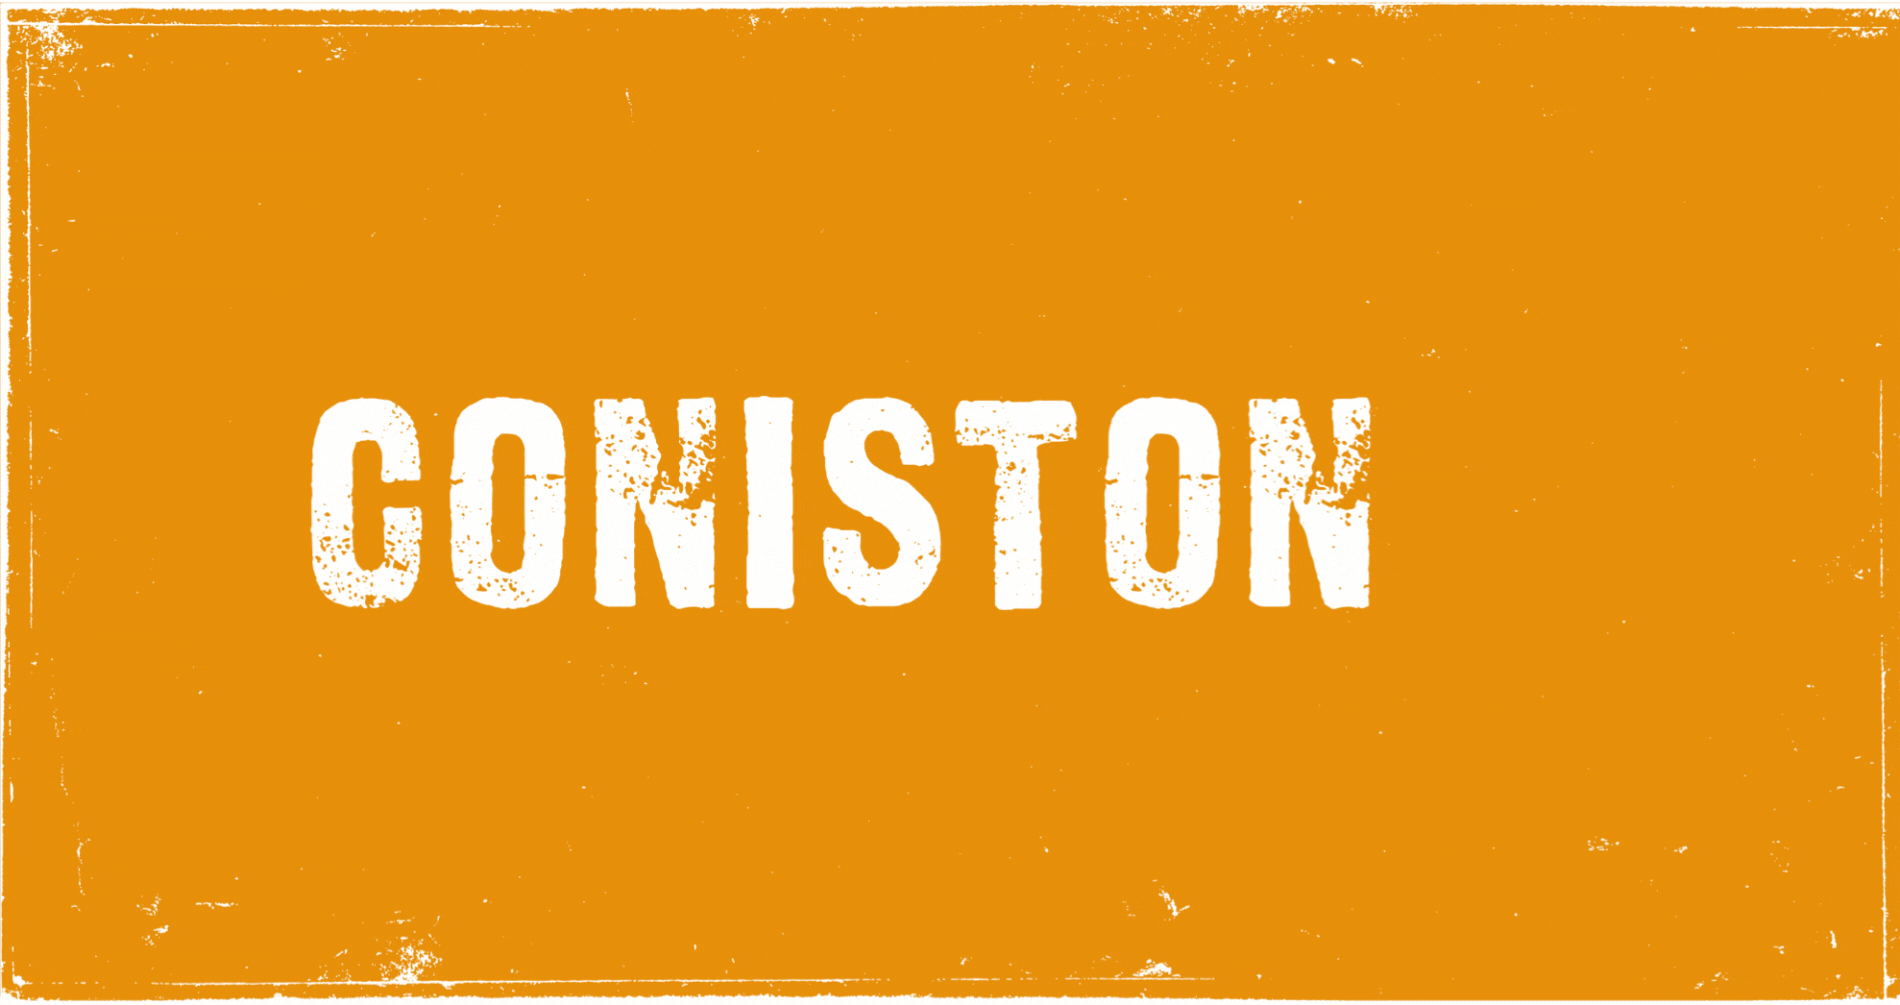 Lakeland 2023 logo reveal video - begins by changing the word Coniston into Conistone, bullet hole appear and then the text "Where almost doesn't matter." The image then fades to reveal the 2023 logo on a green background.